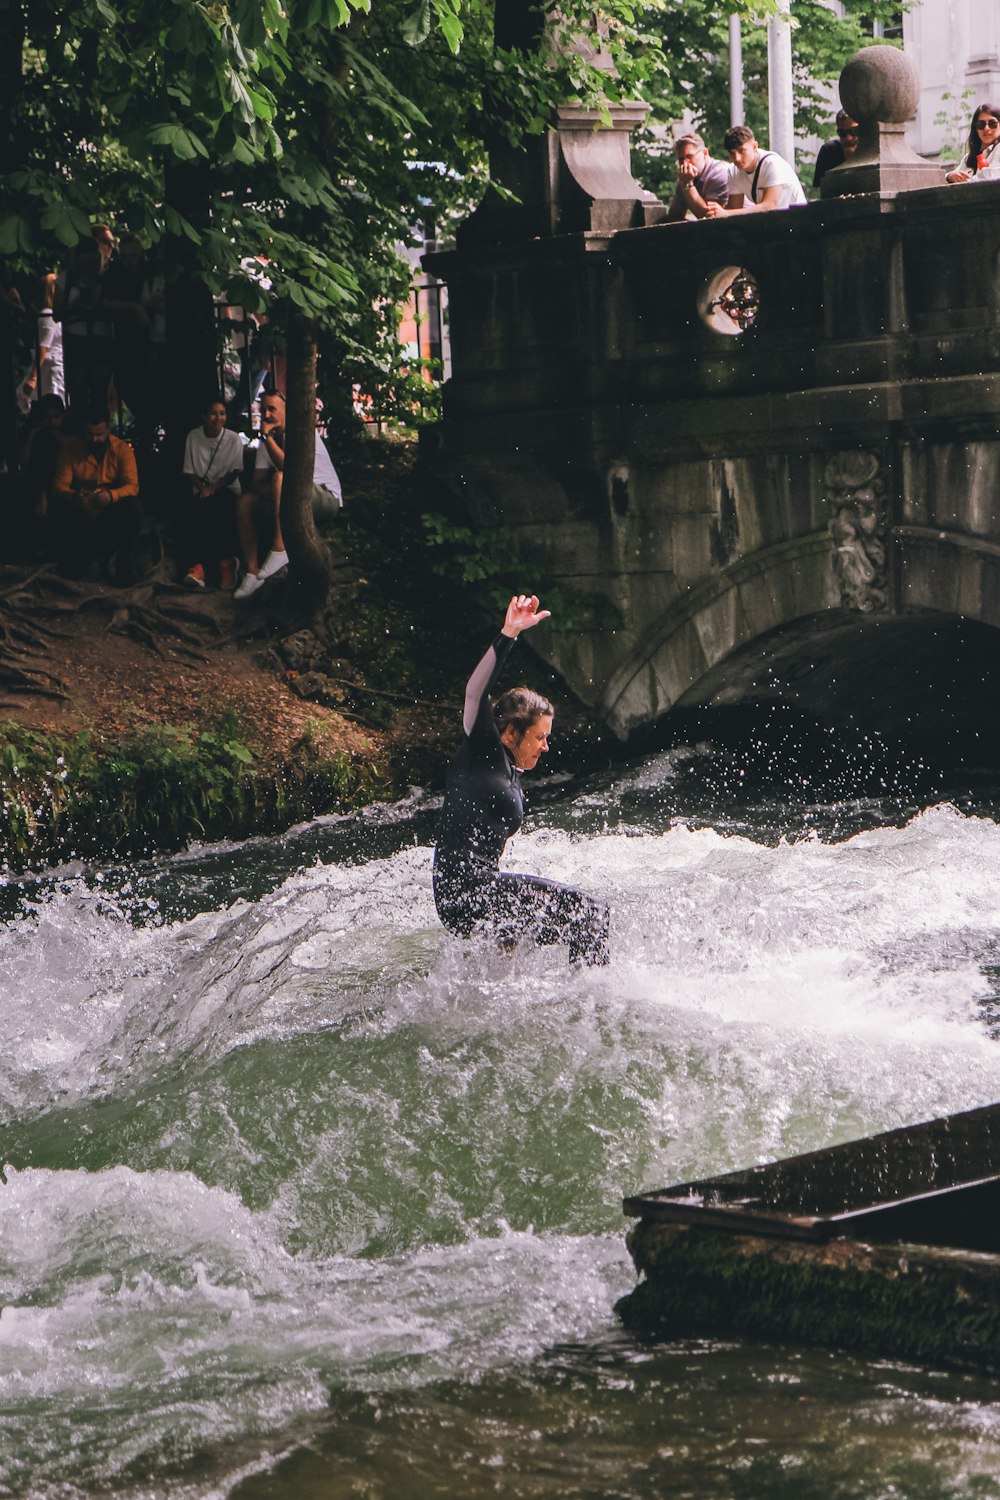 a man riding a wave on top of a river